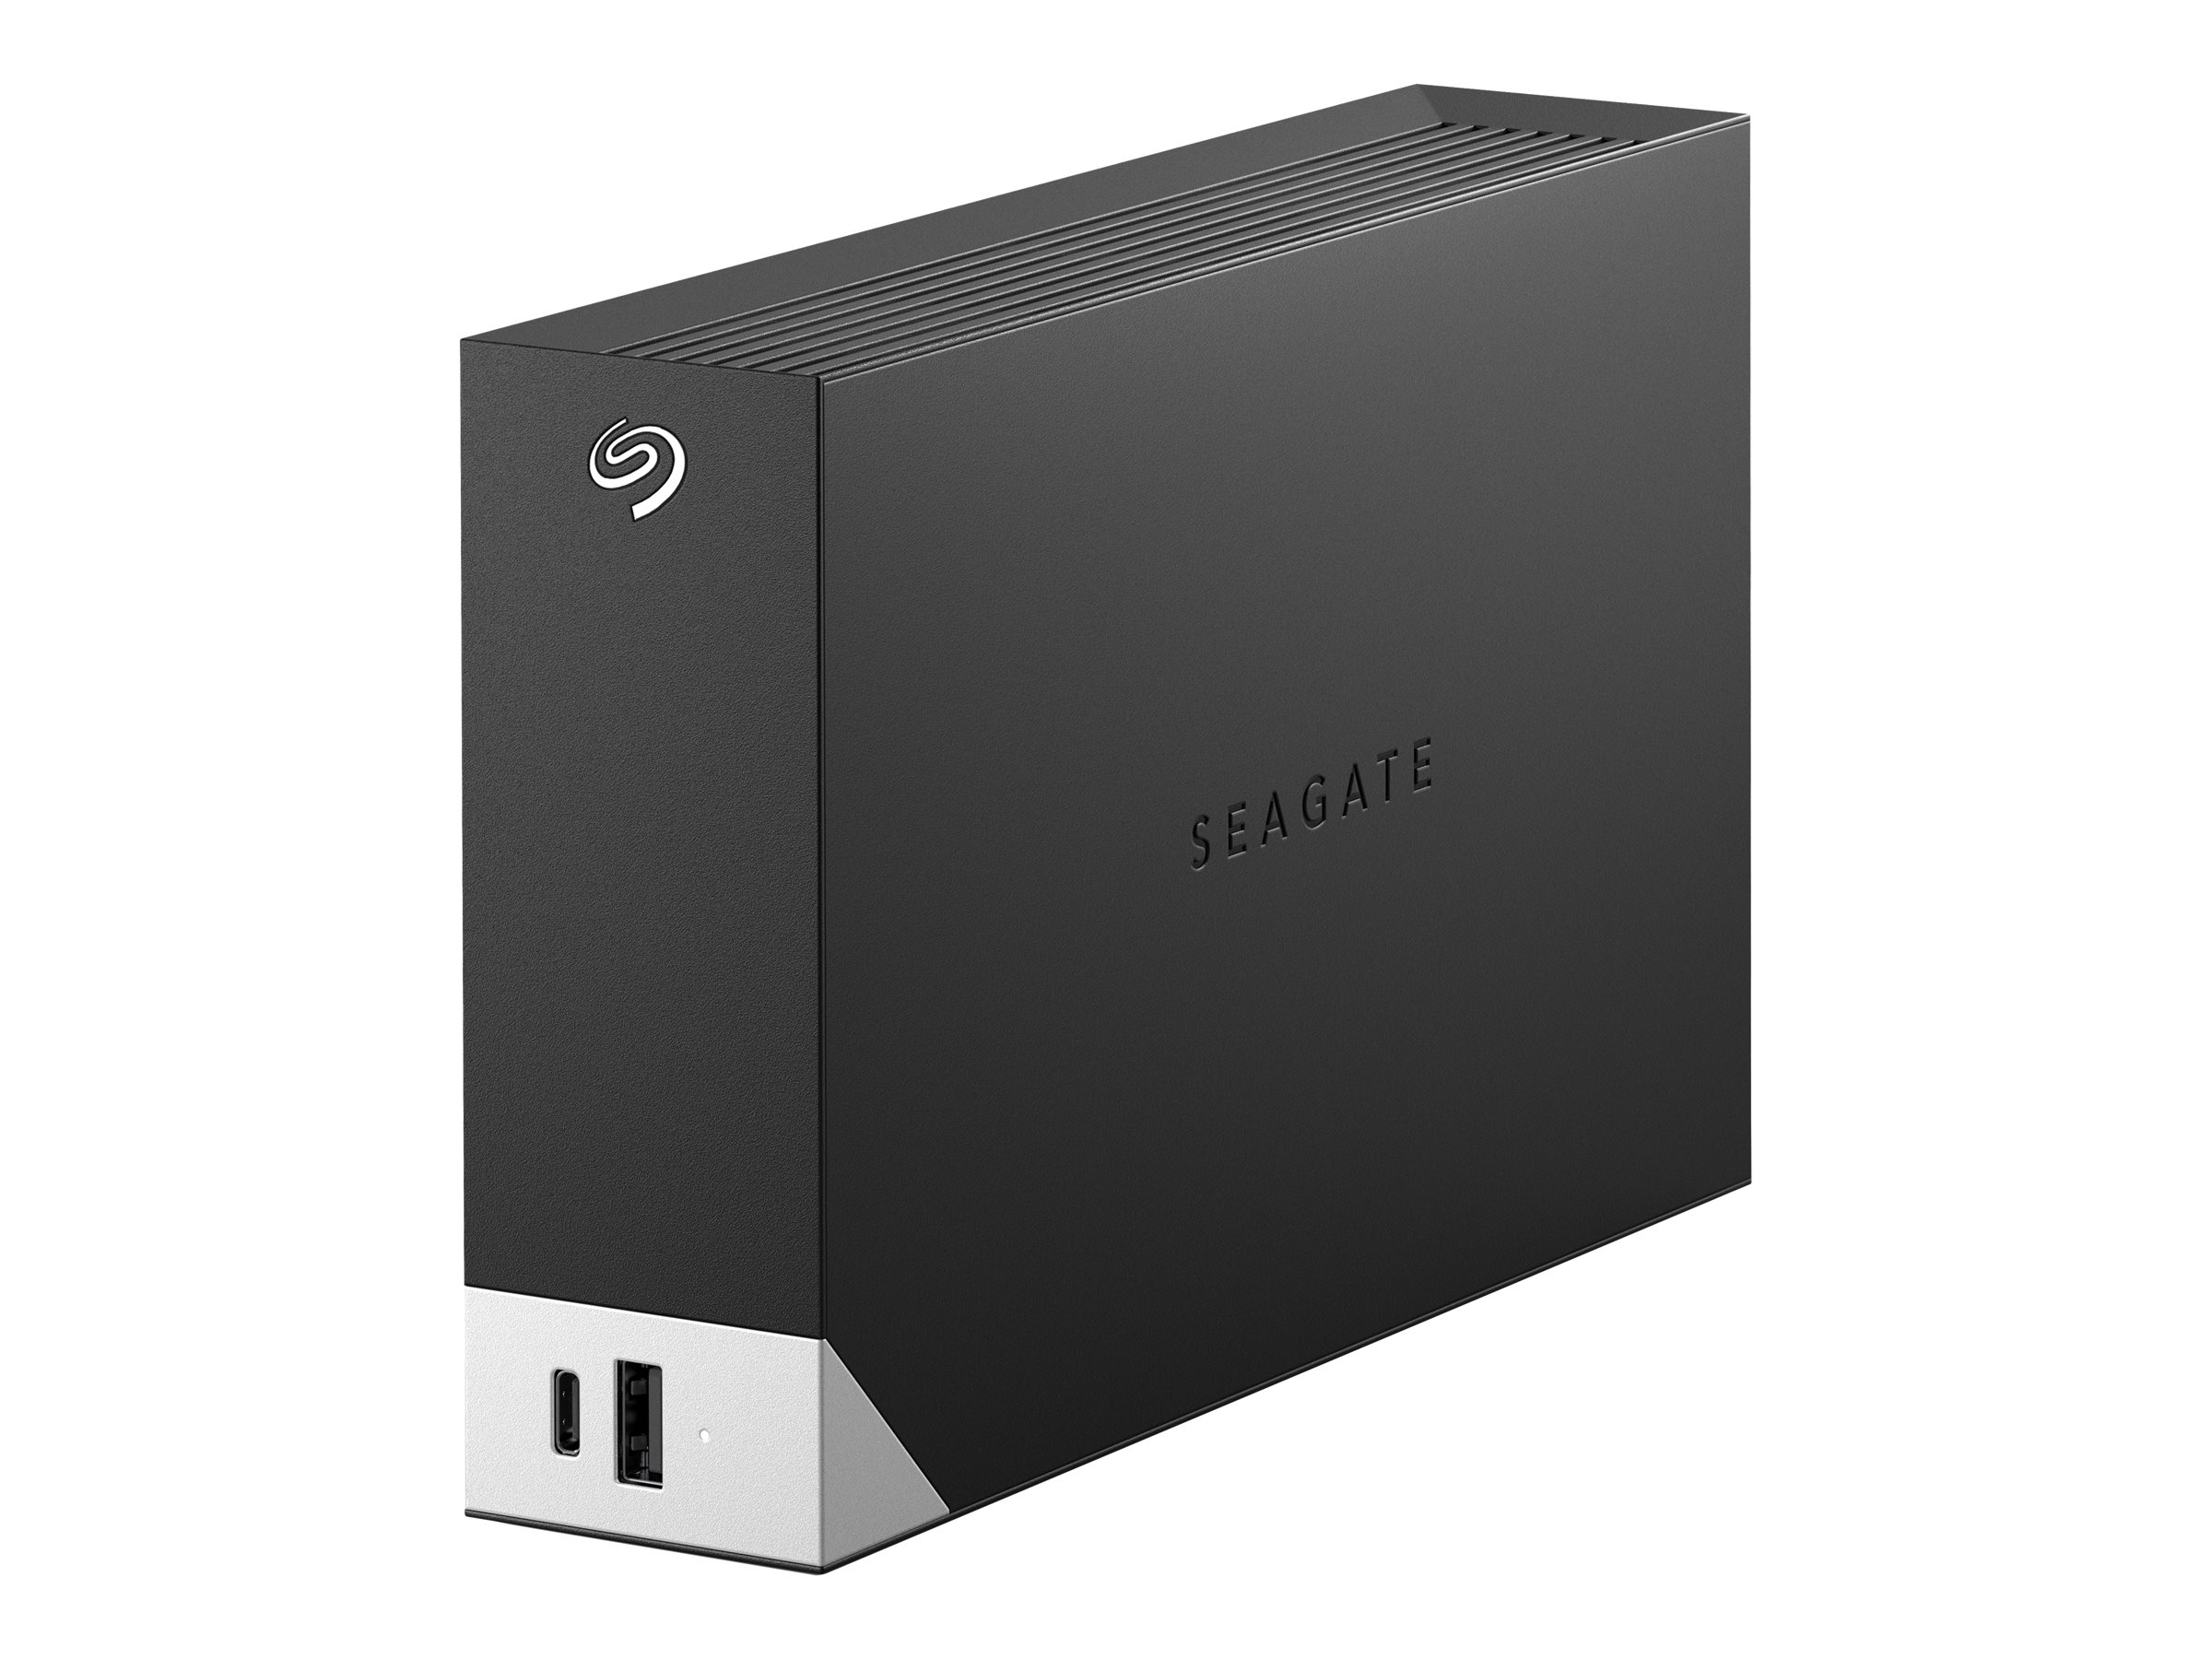 SEAGATE ONE TOUCH DESKTOP WITH HUB (STLC8000400)